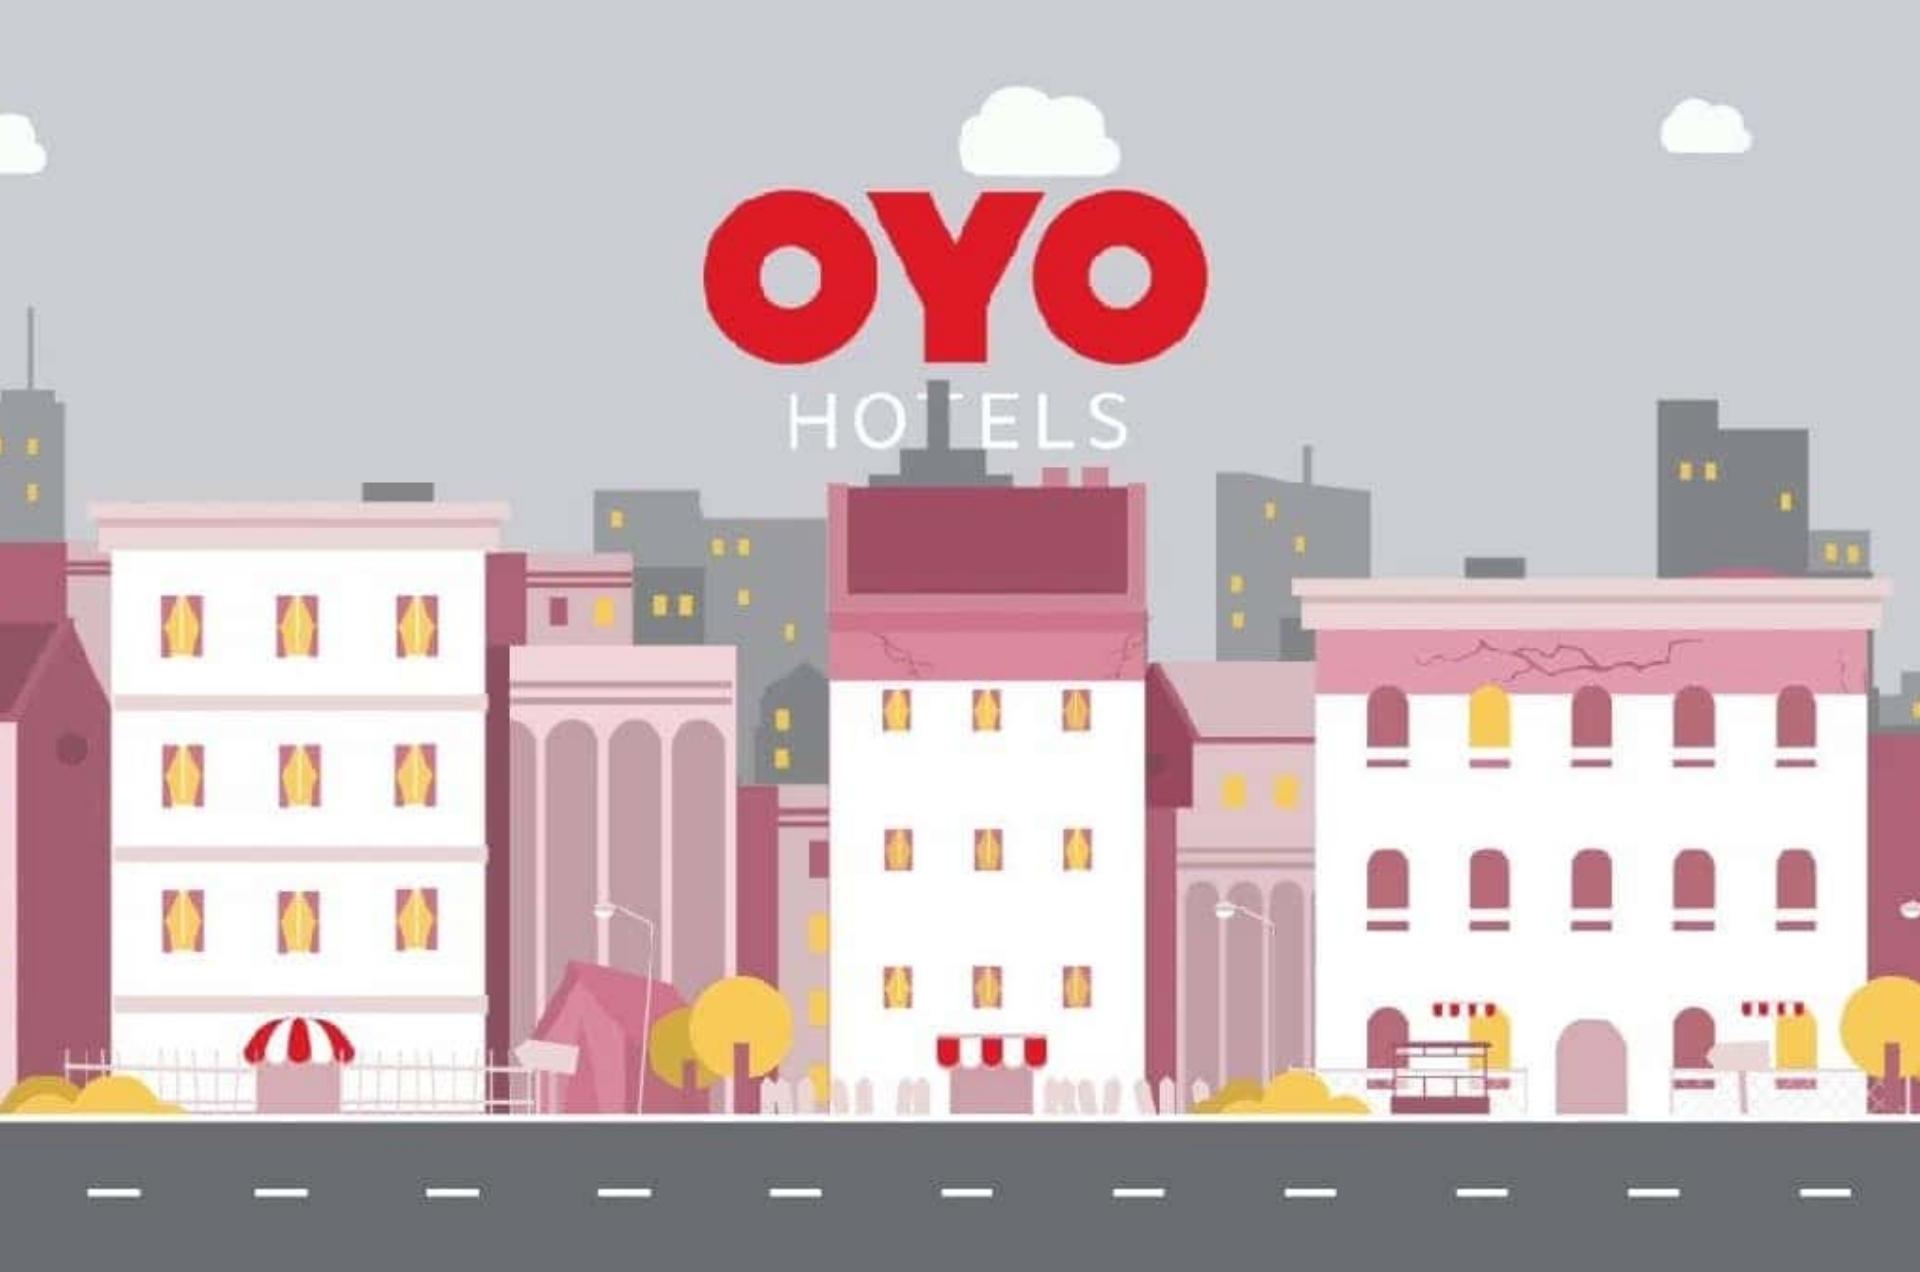 In India, OYO is a franchised as well as leased hotel chain. Ritesh Agarwal established OYO in 2012 with cheap hotels as its primary focus.